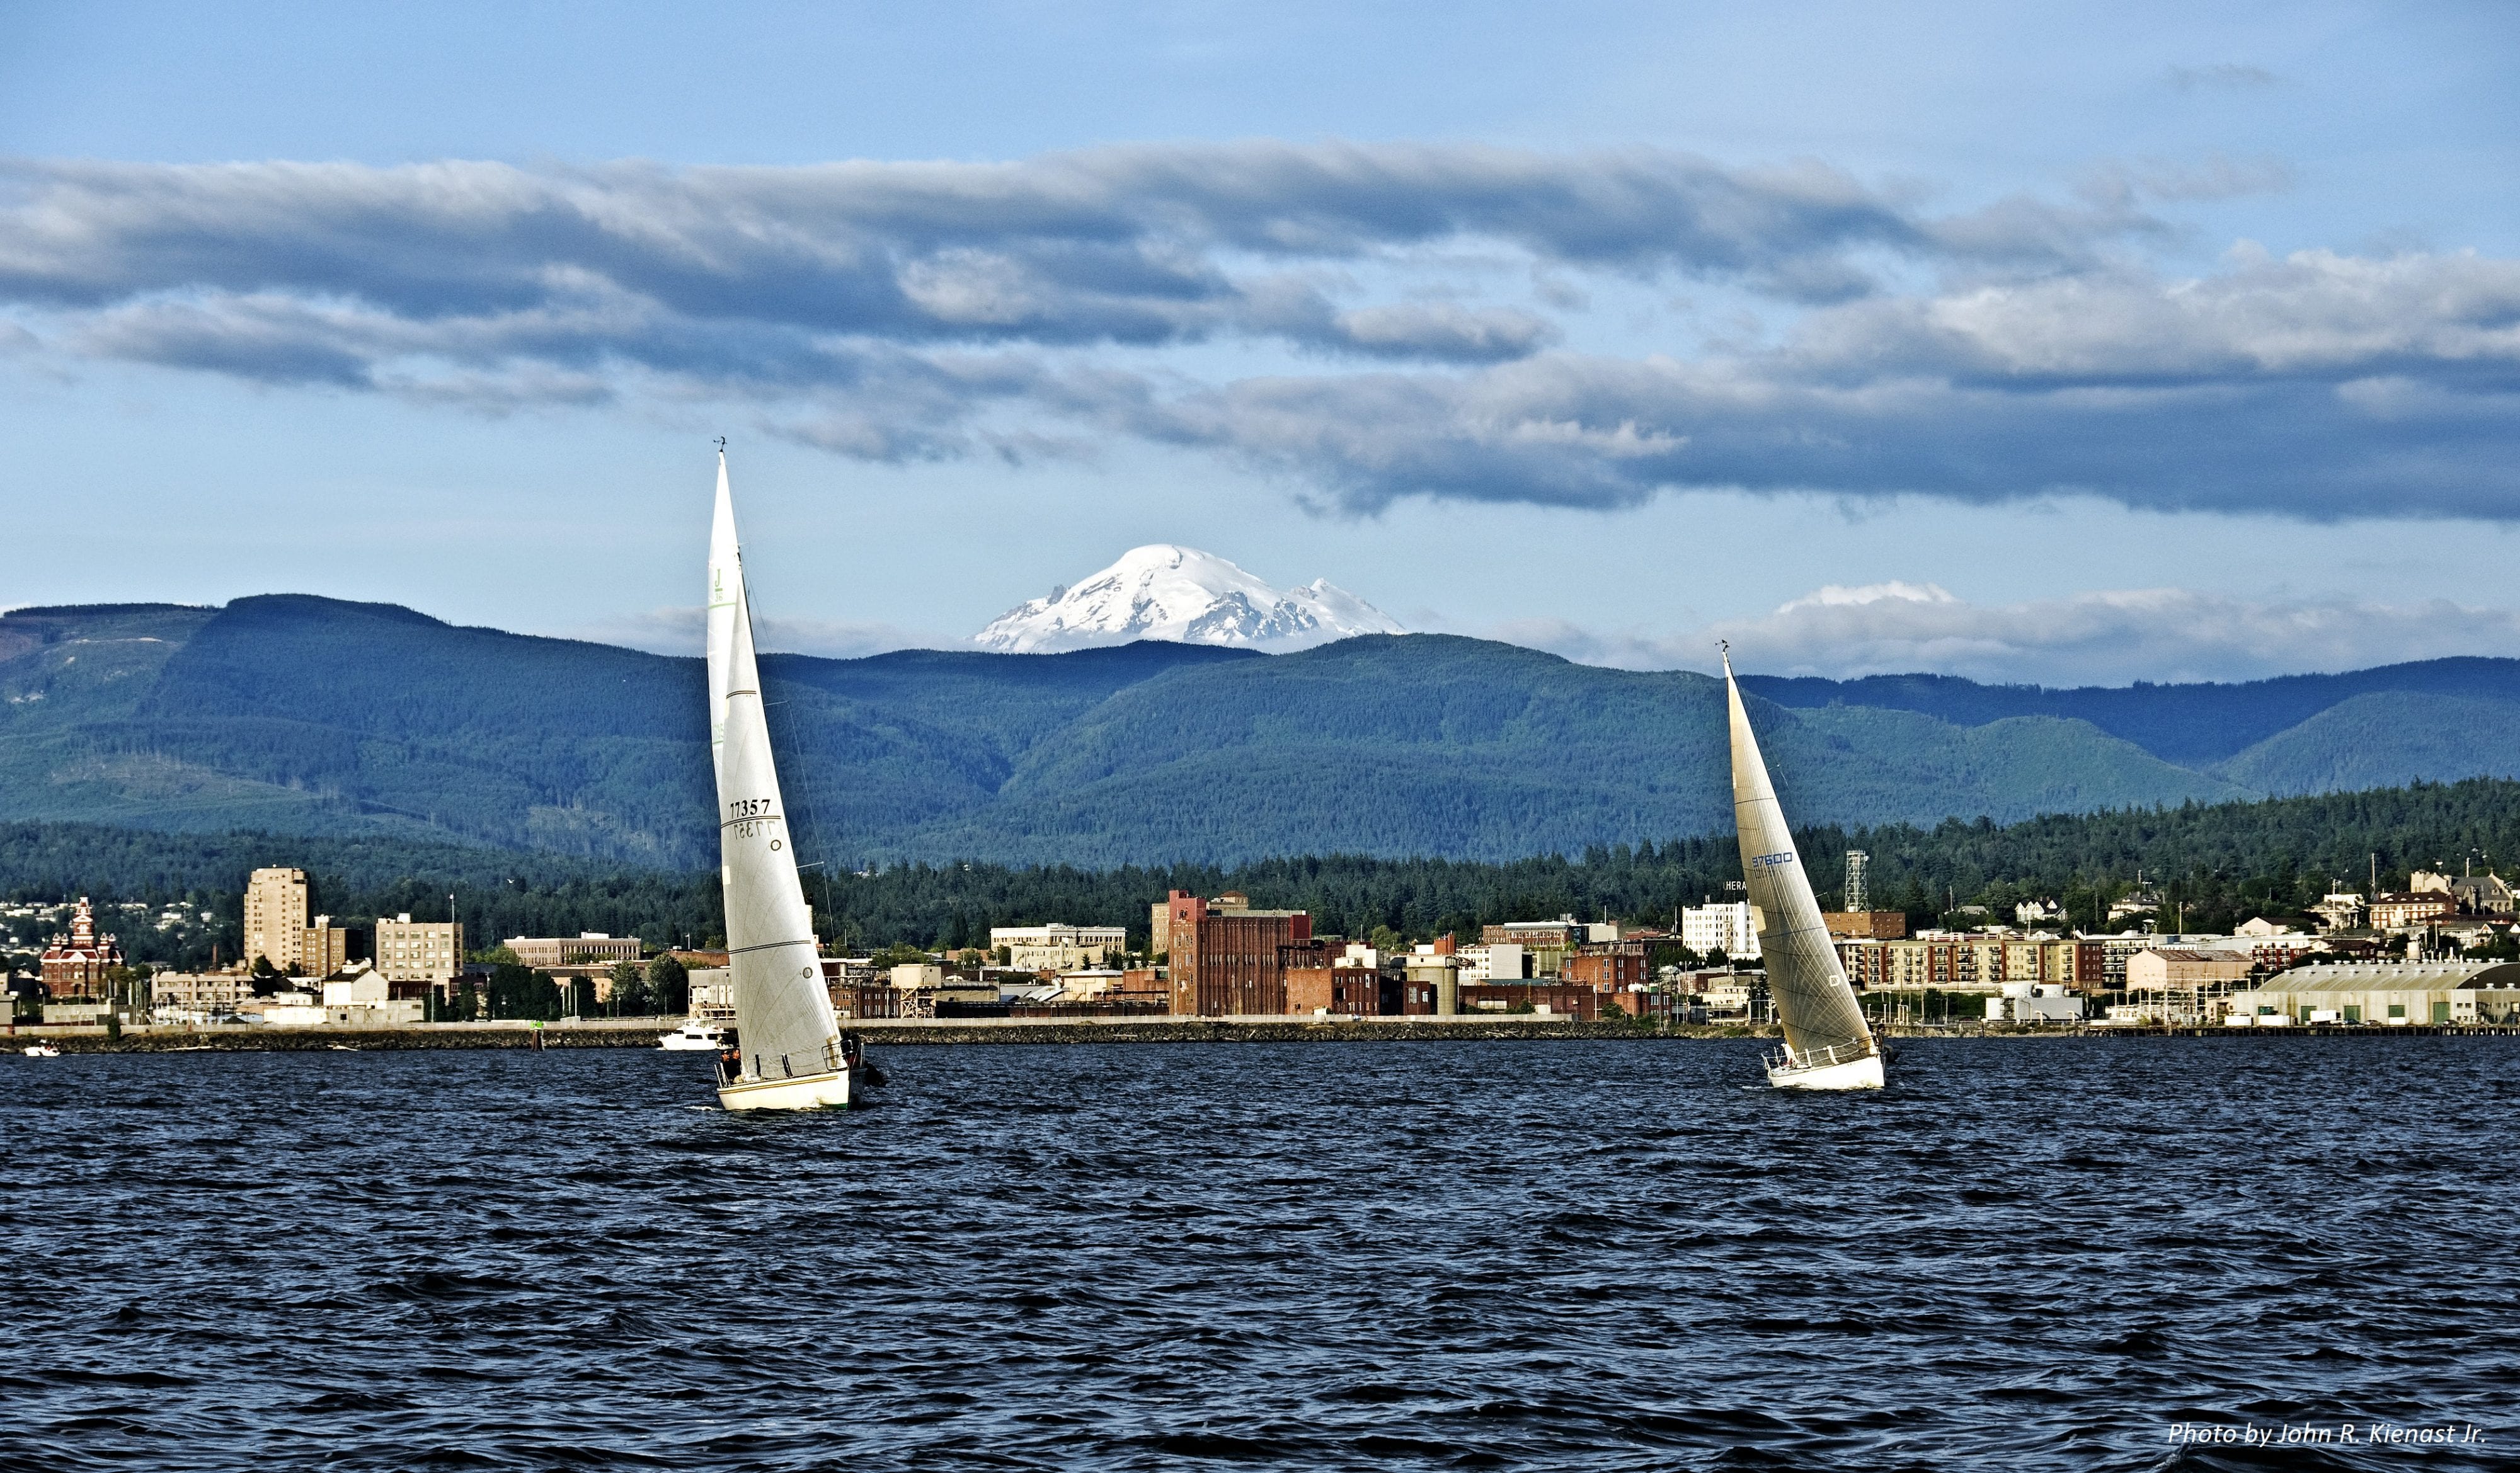 Boats sailing on clear water on Bellingham Bay